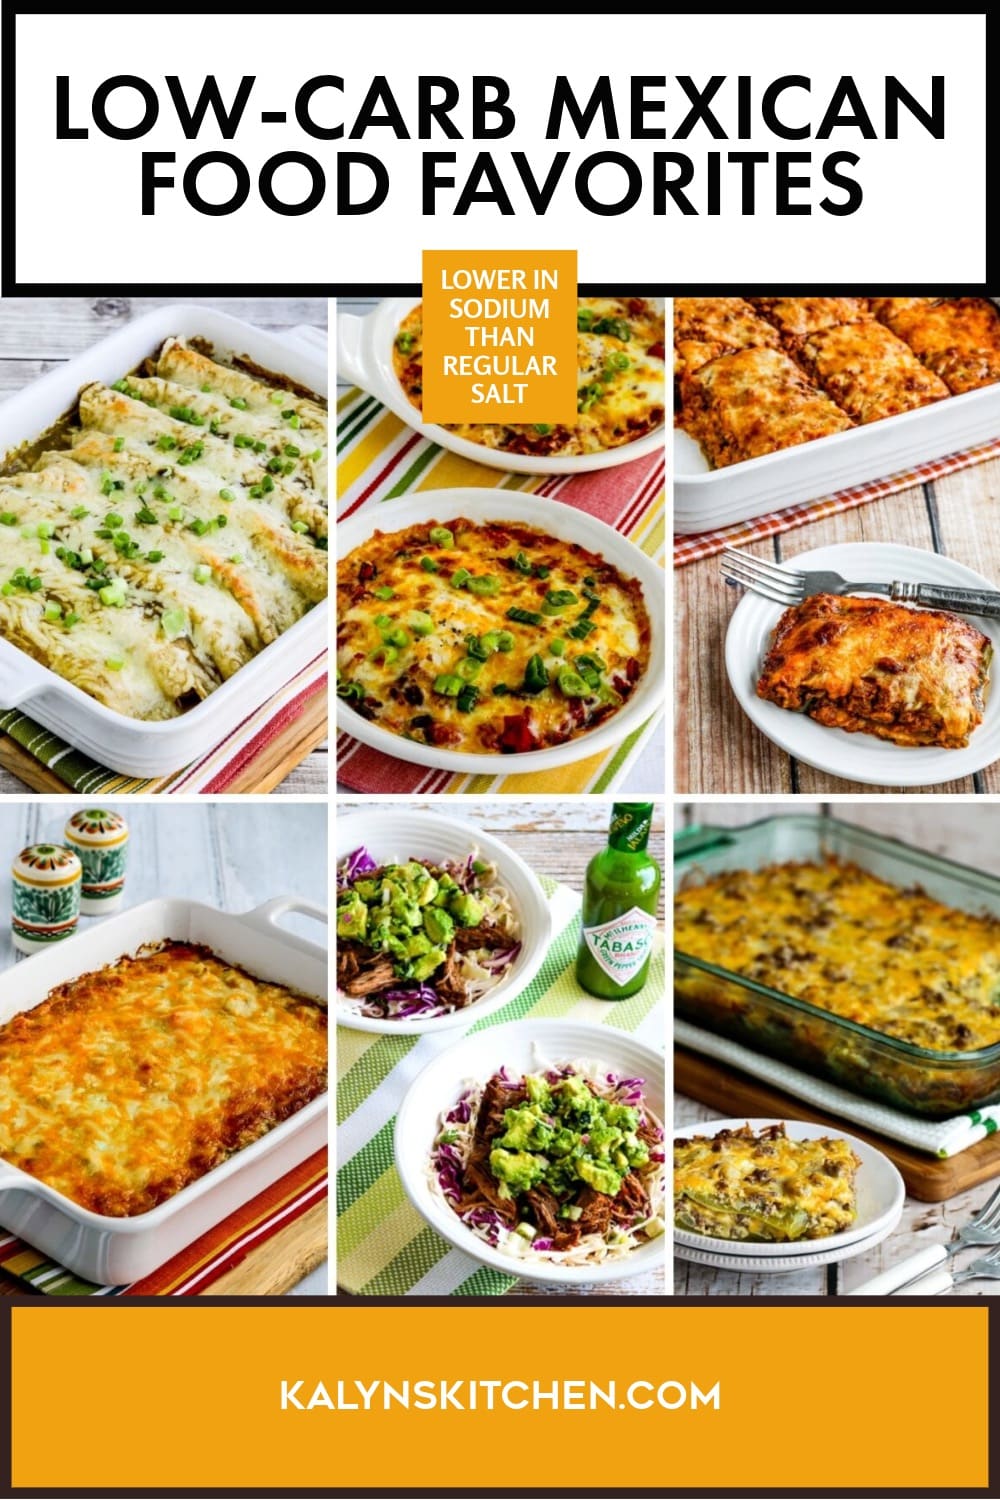 Pinterest image of Low-Carb Mexican Food Favorites